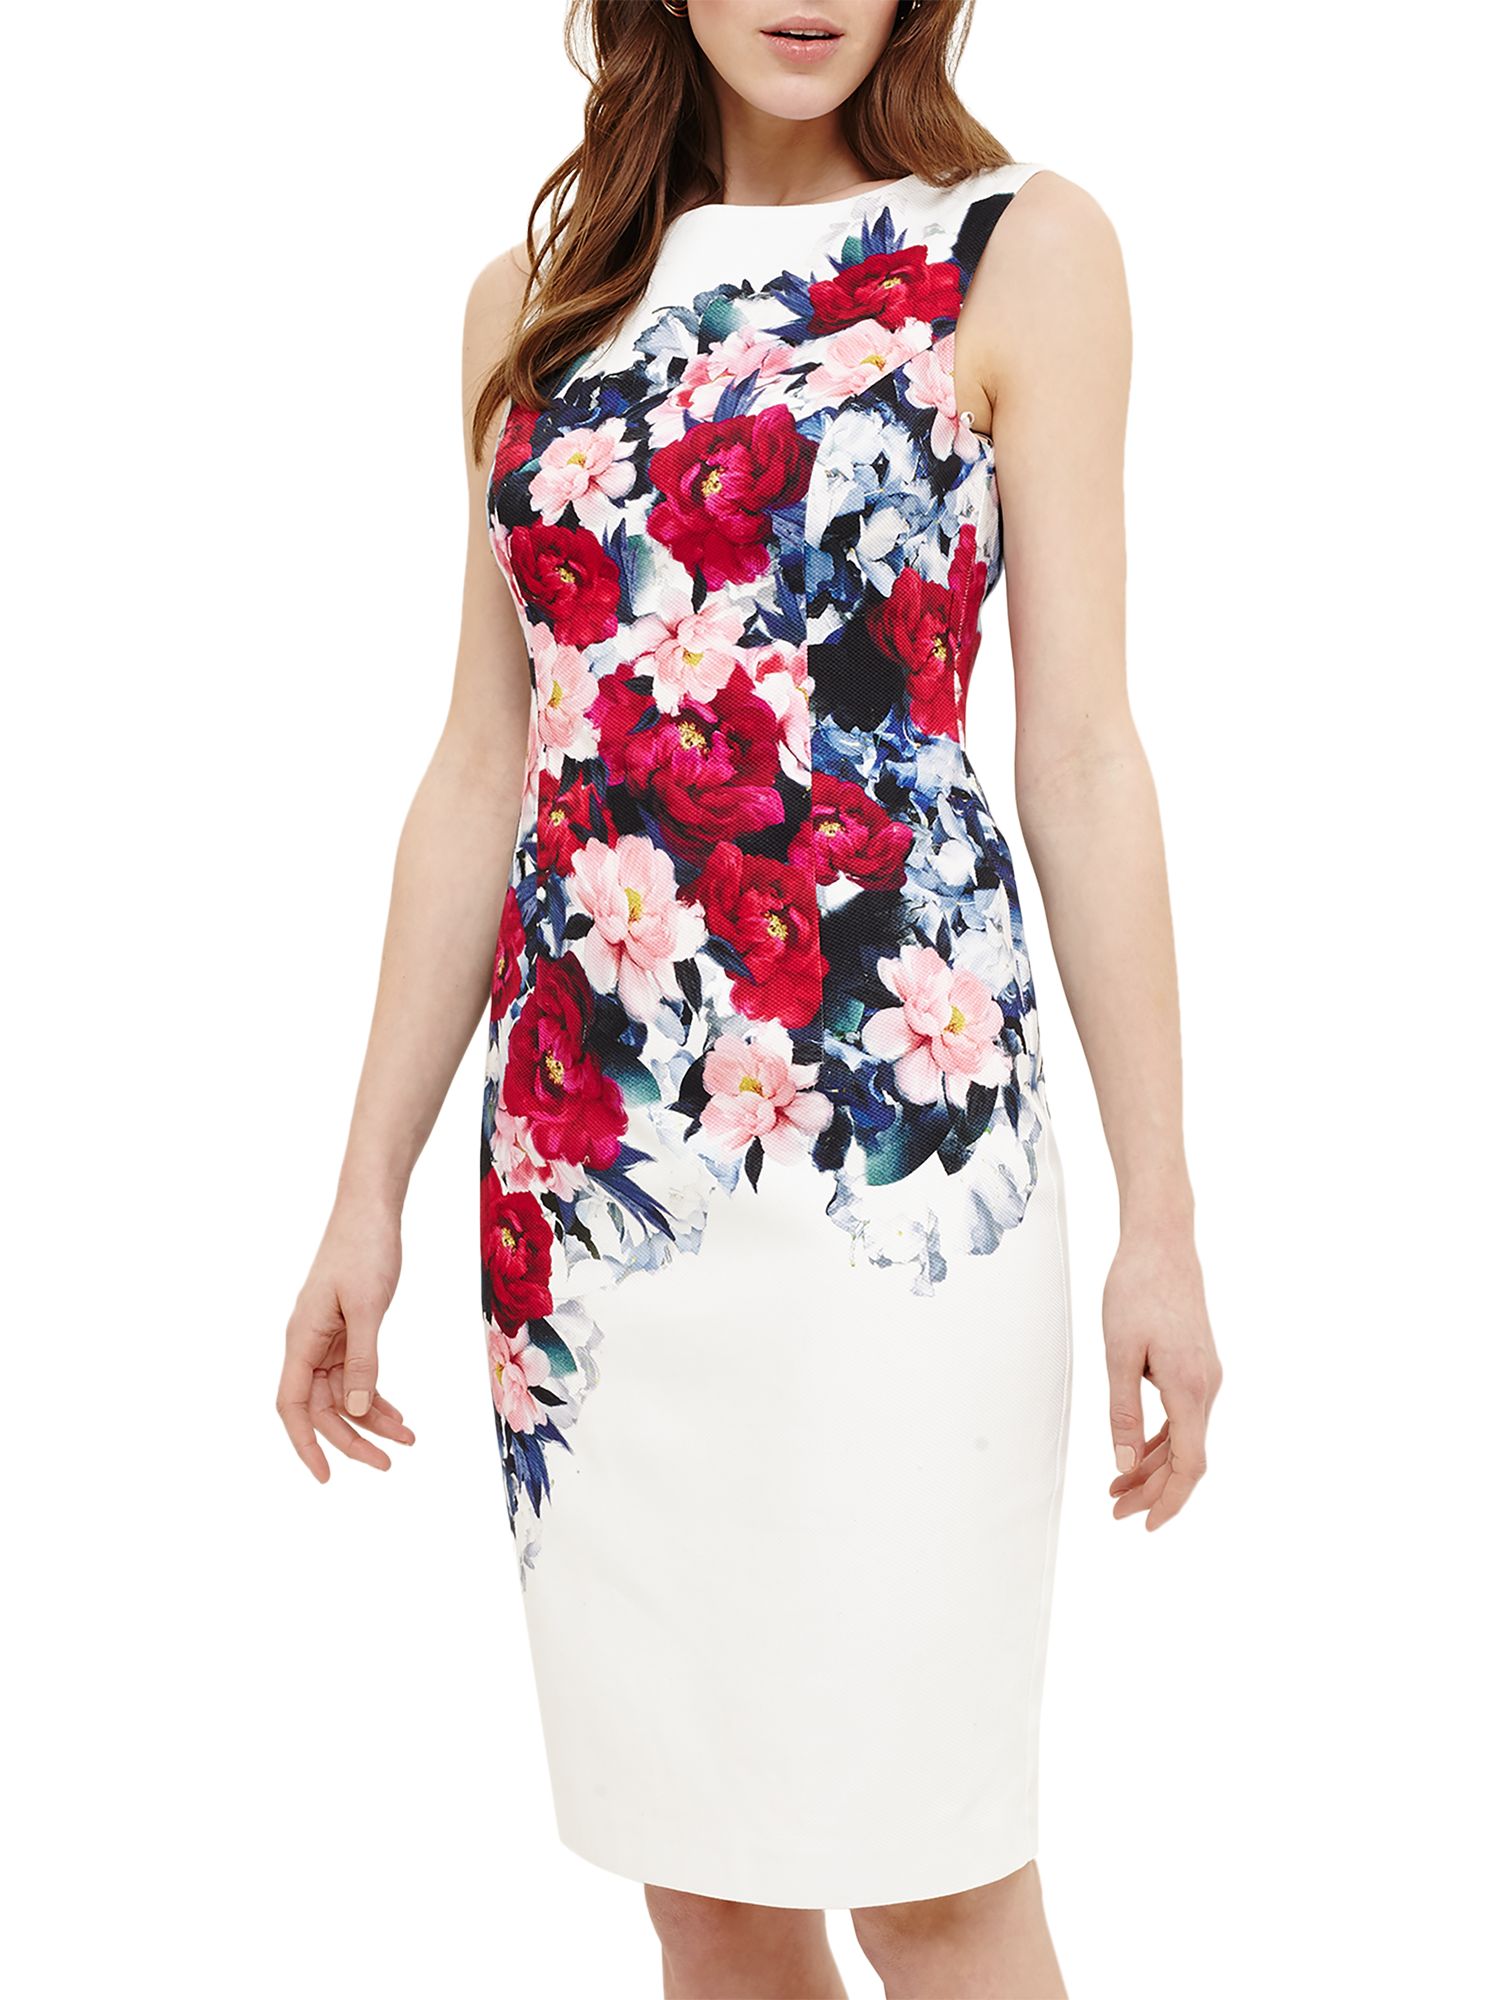 Phase Eight Cassia Floral Printed Dress, Ivory/Multi